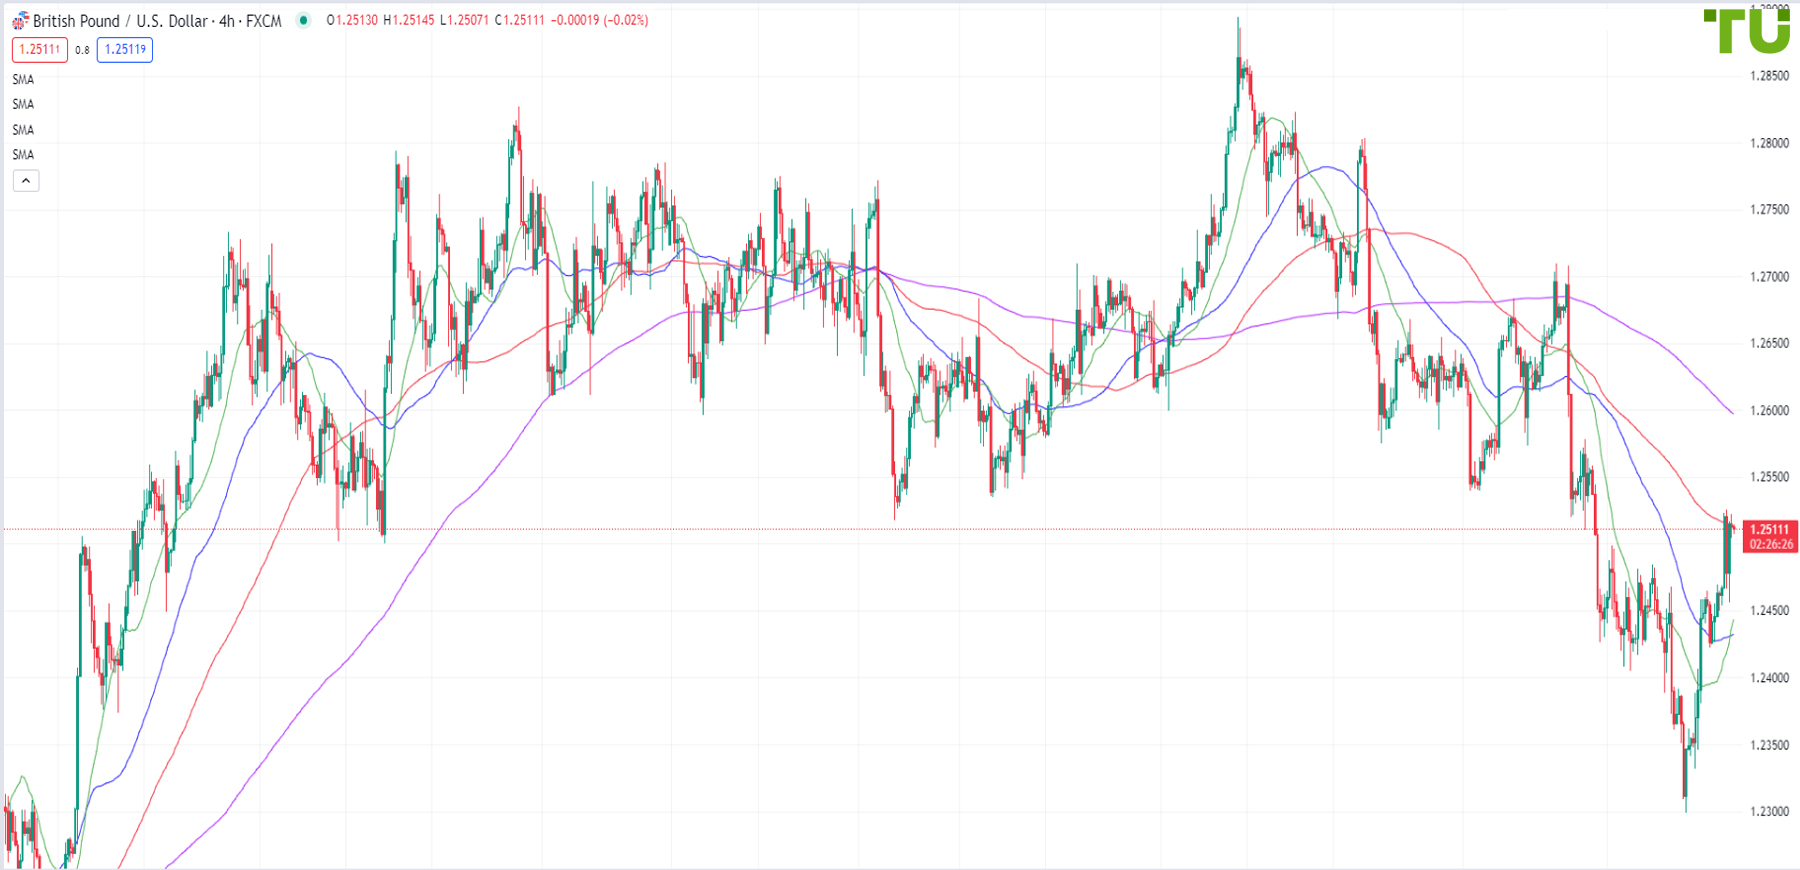 GBP/USD bought on decline